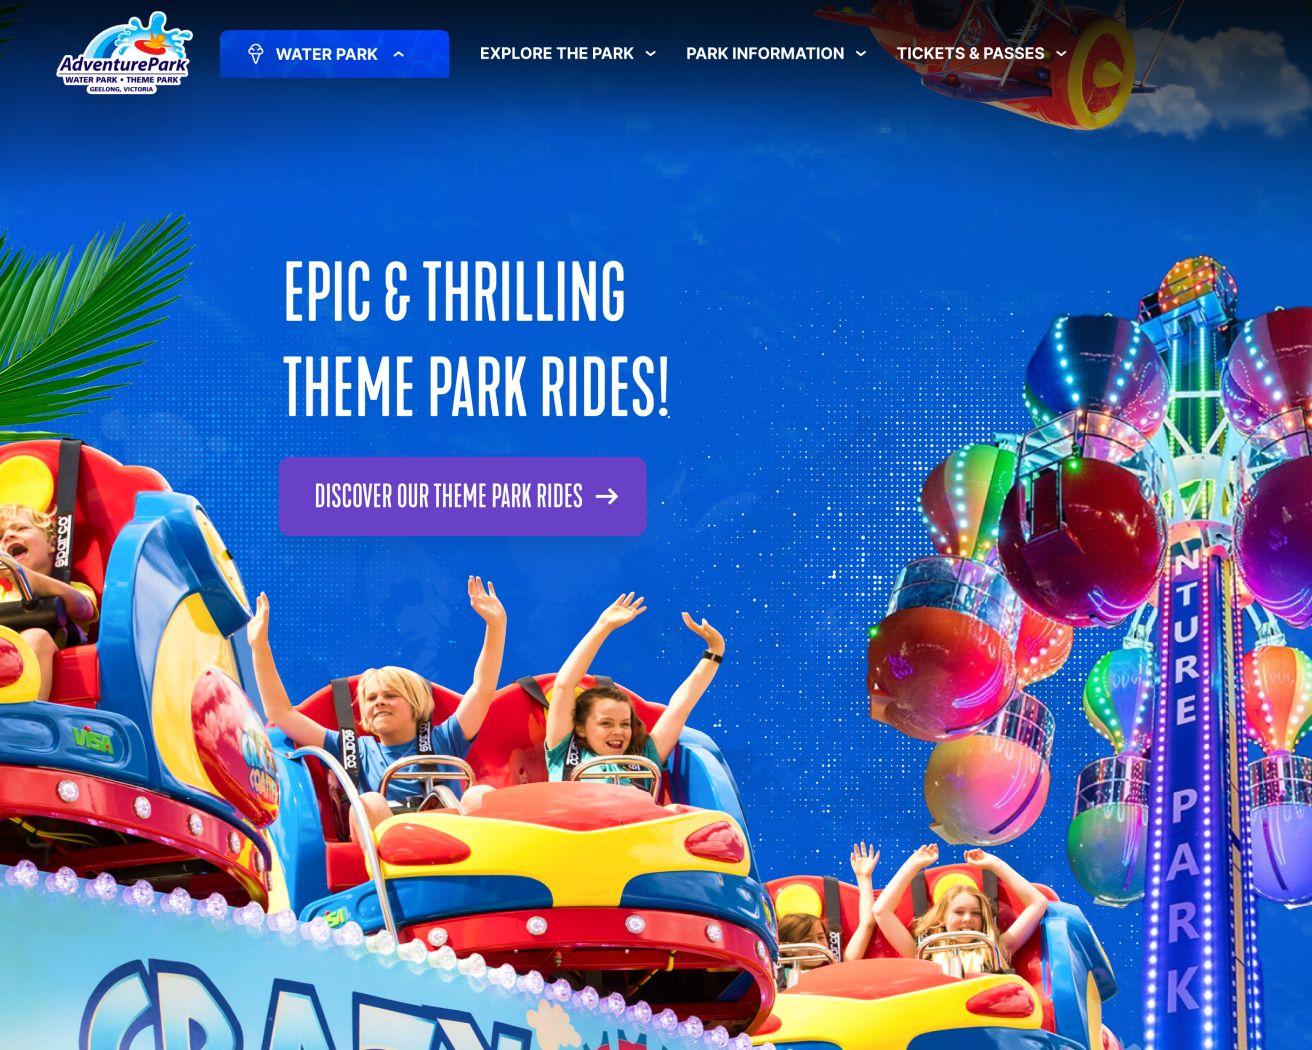 A new website experience for Victoria’s biggest waterpark